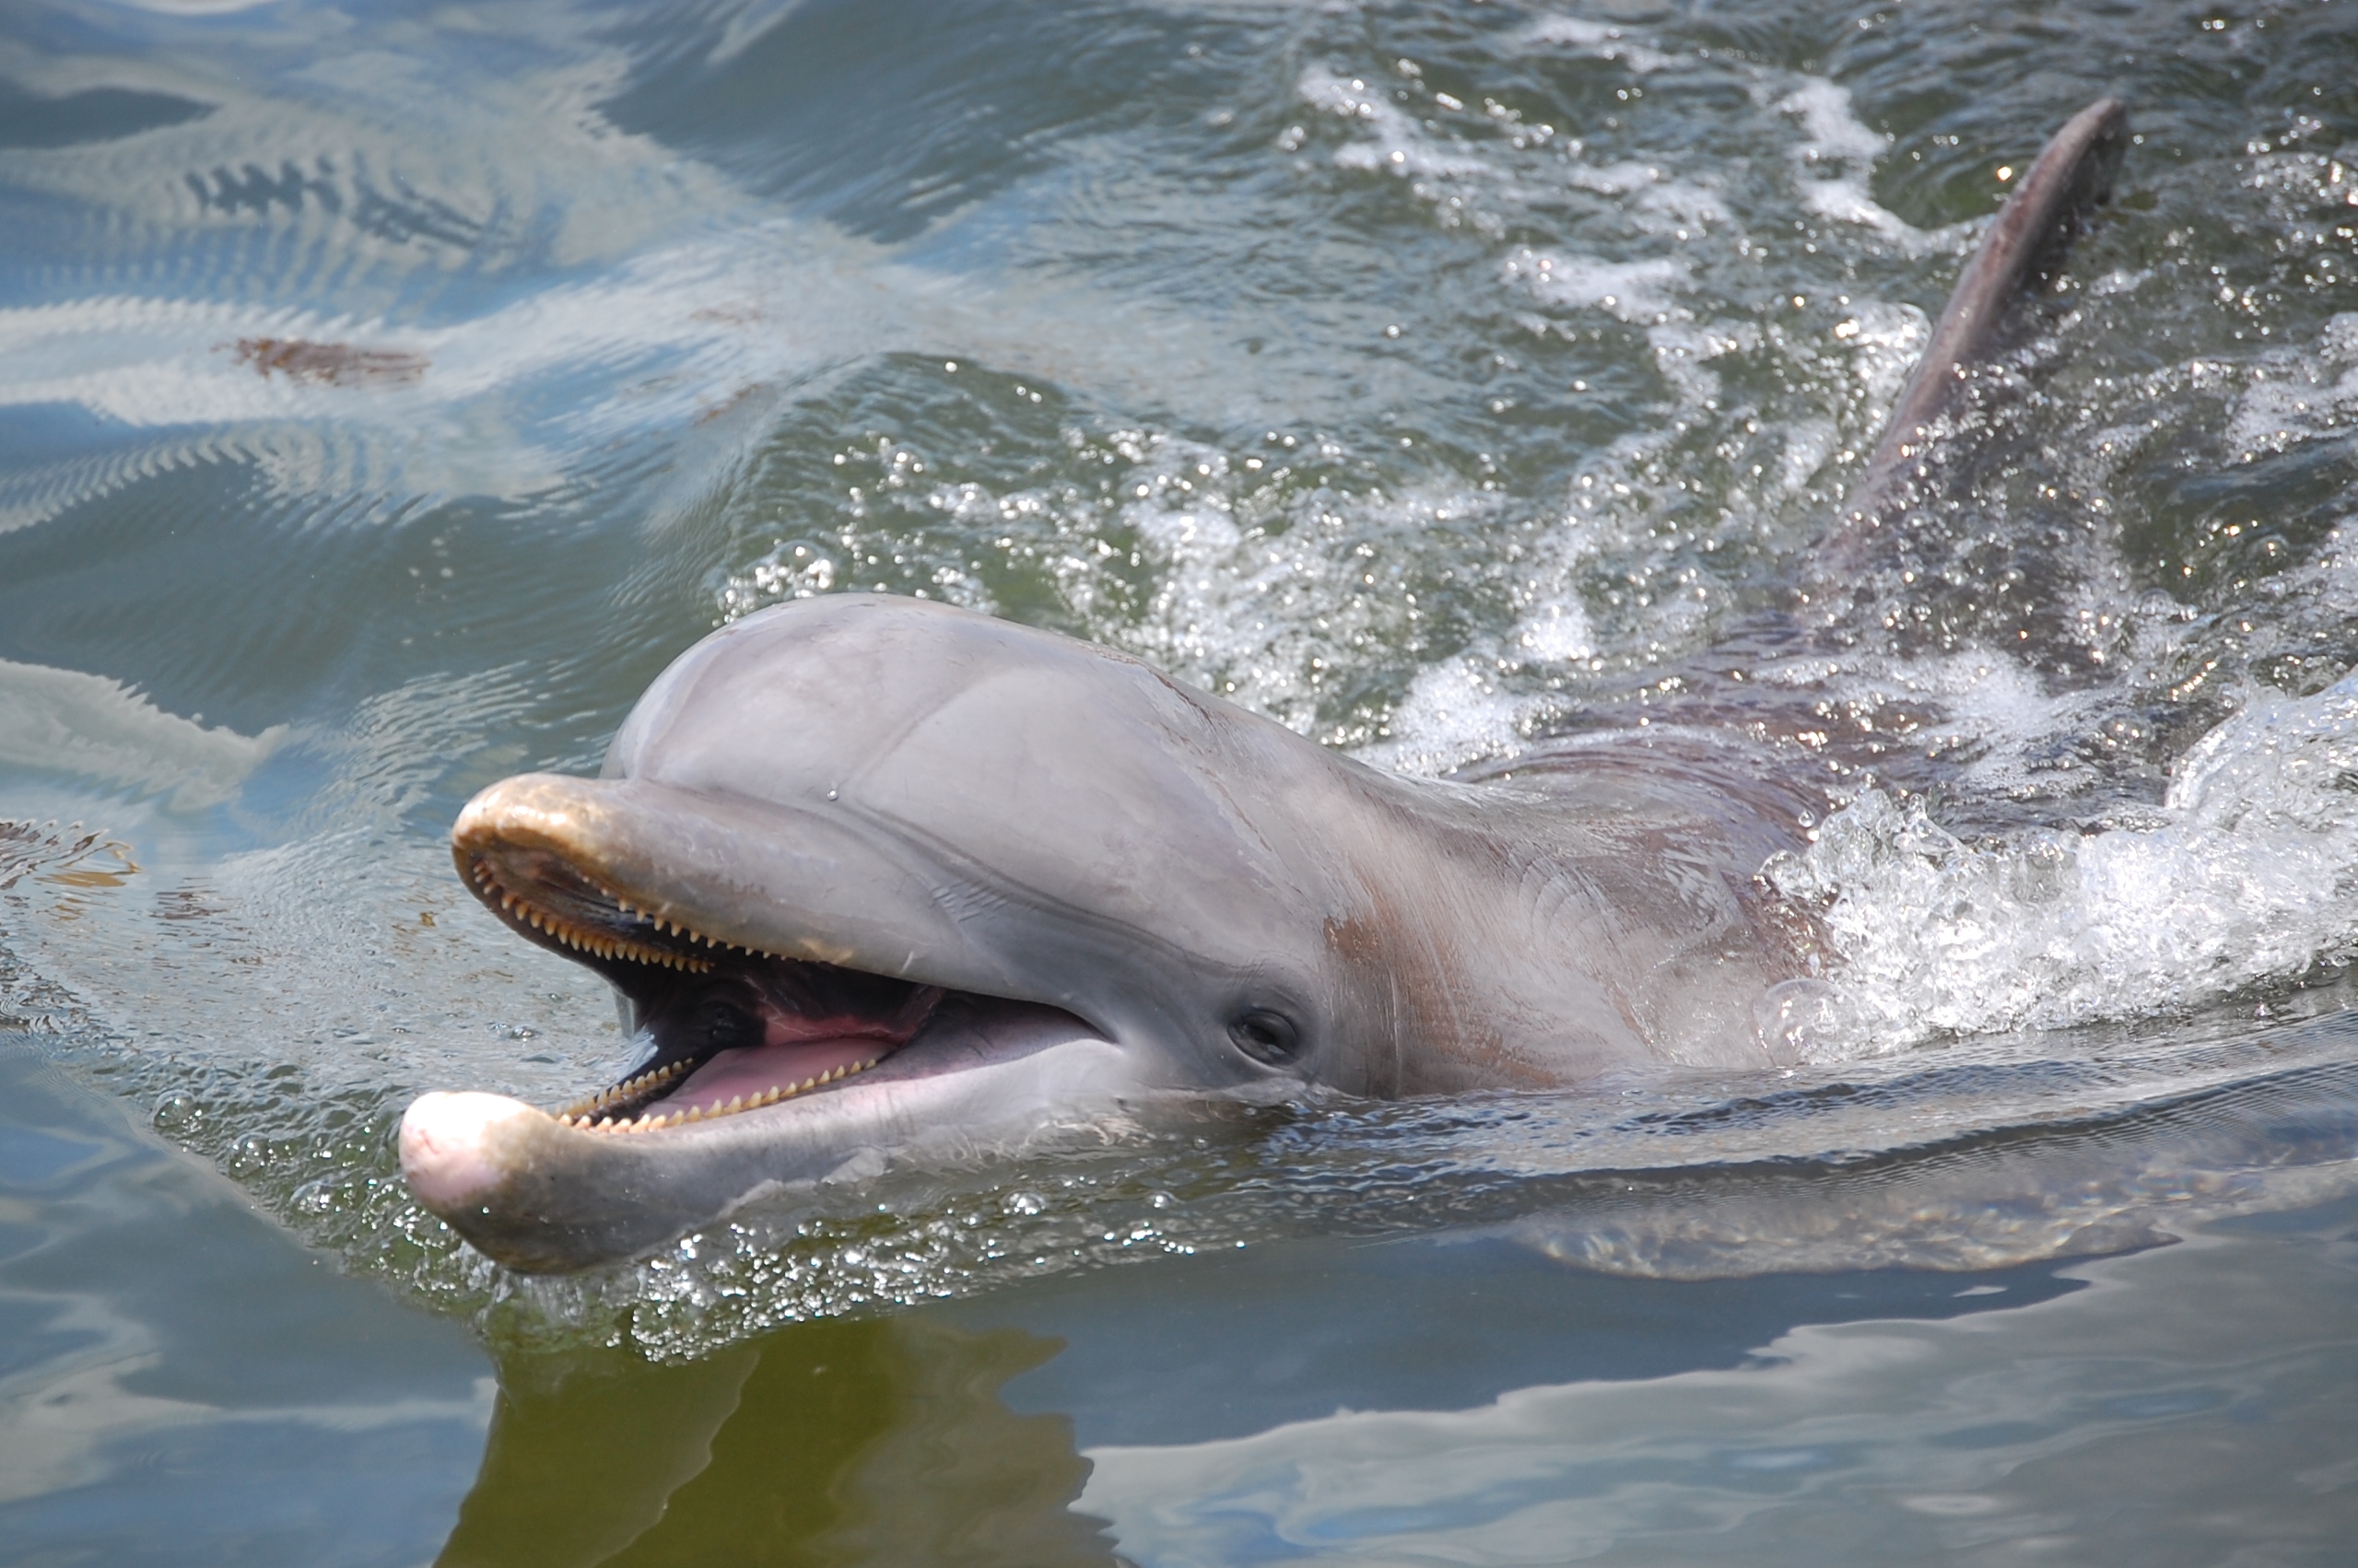 Best Things to Do in Florida Keys - Dolphin in the Florida Keys